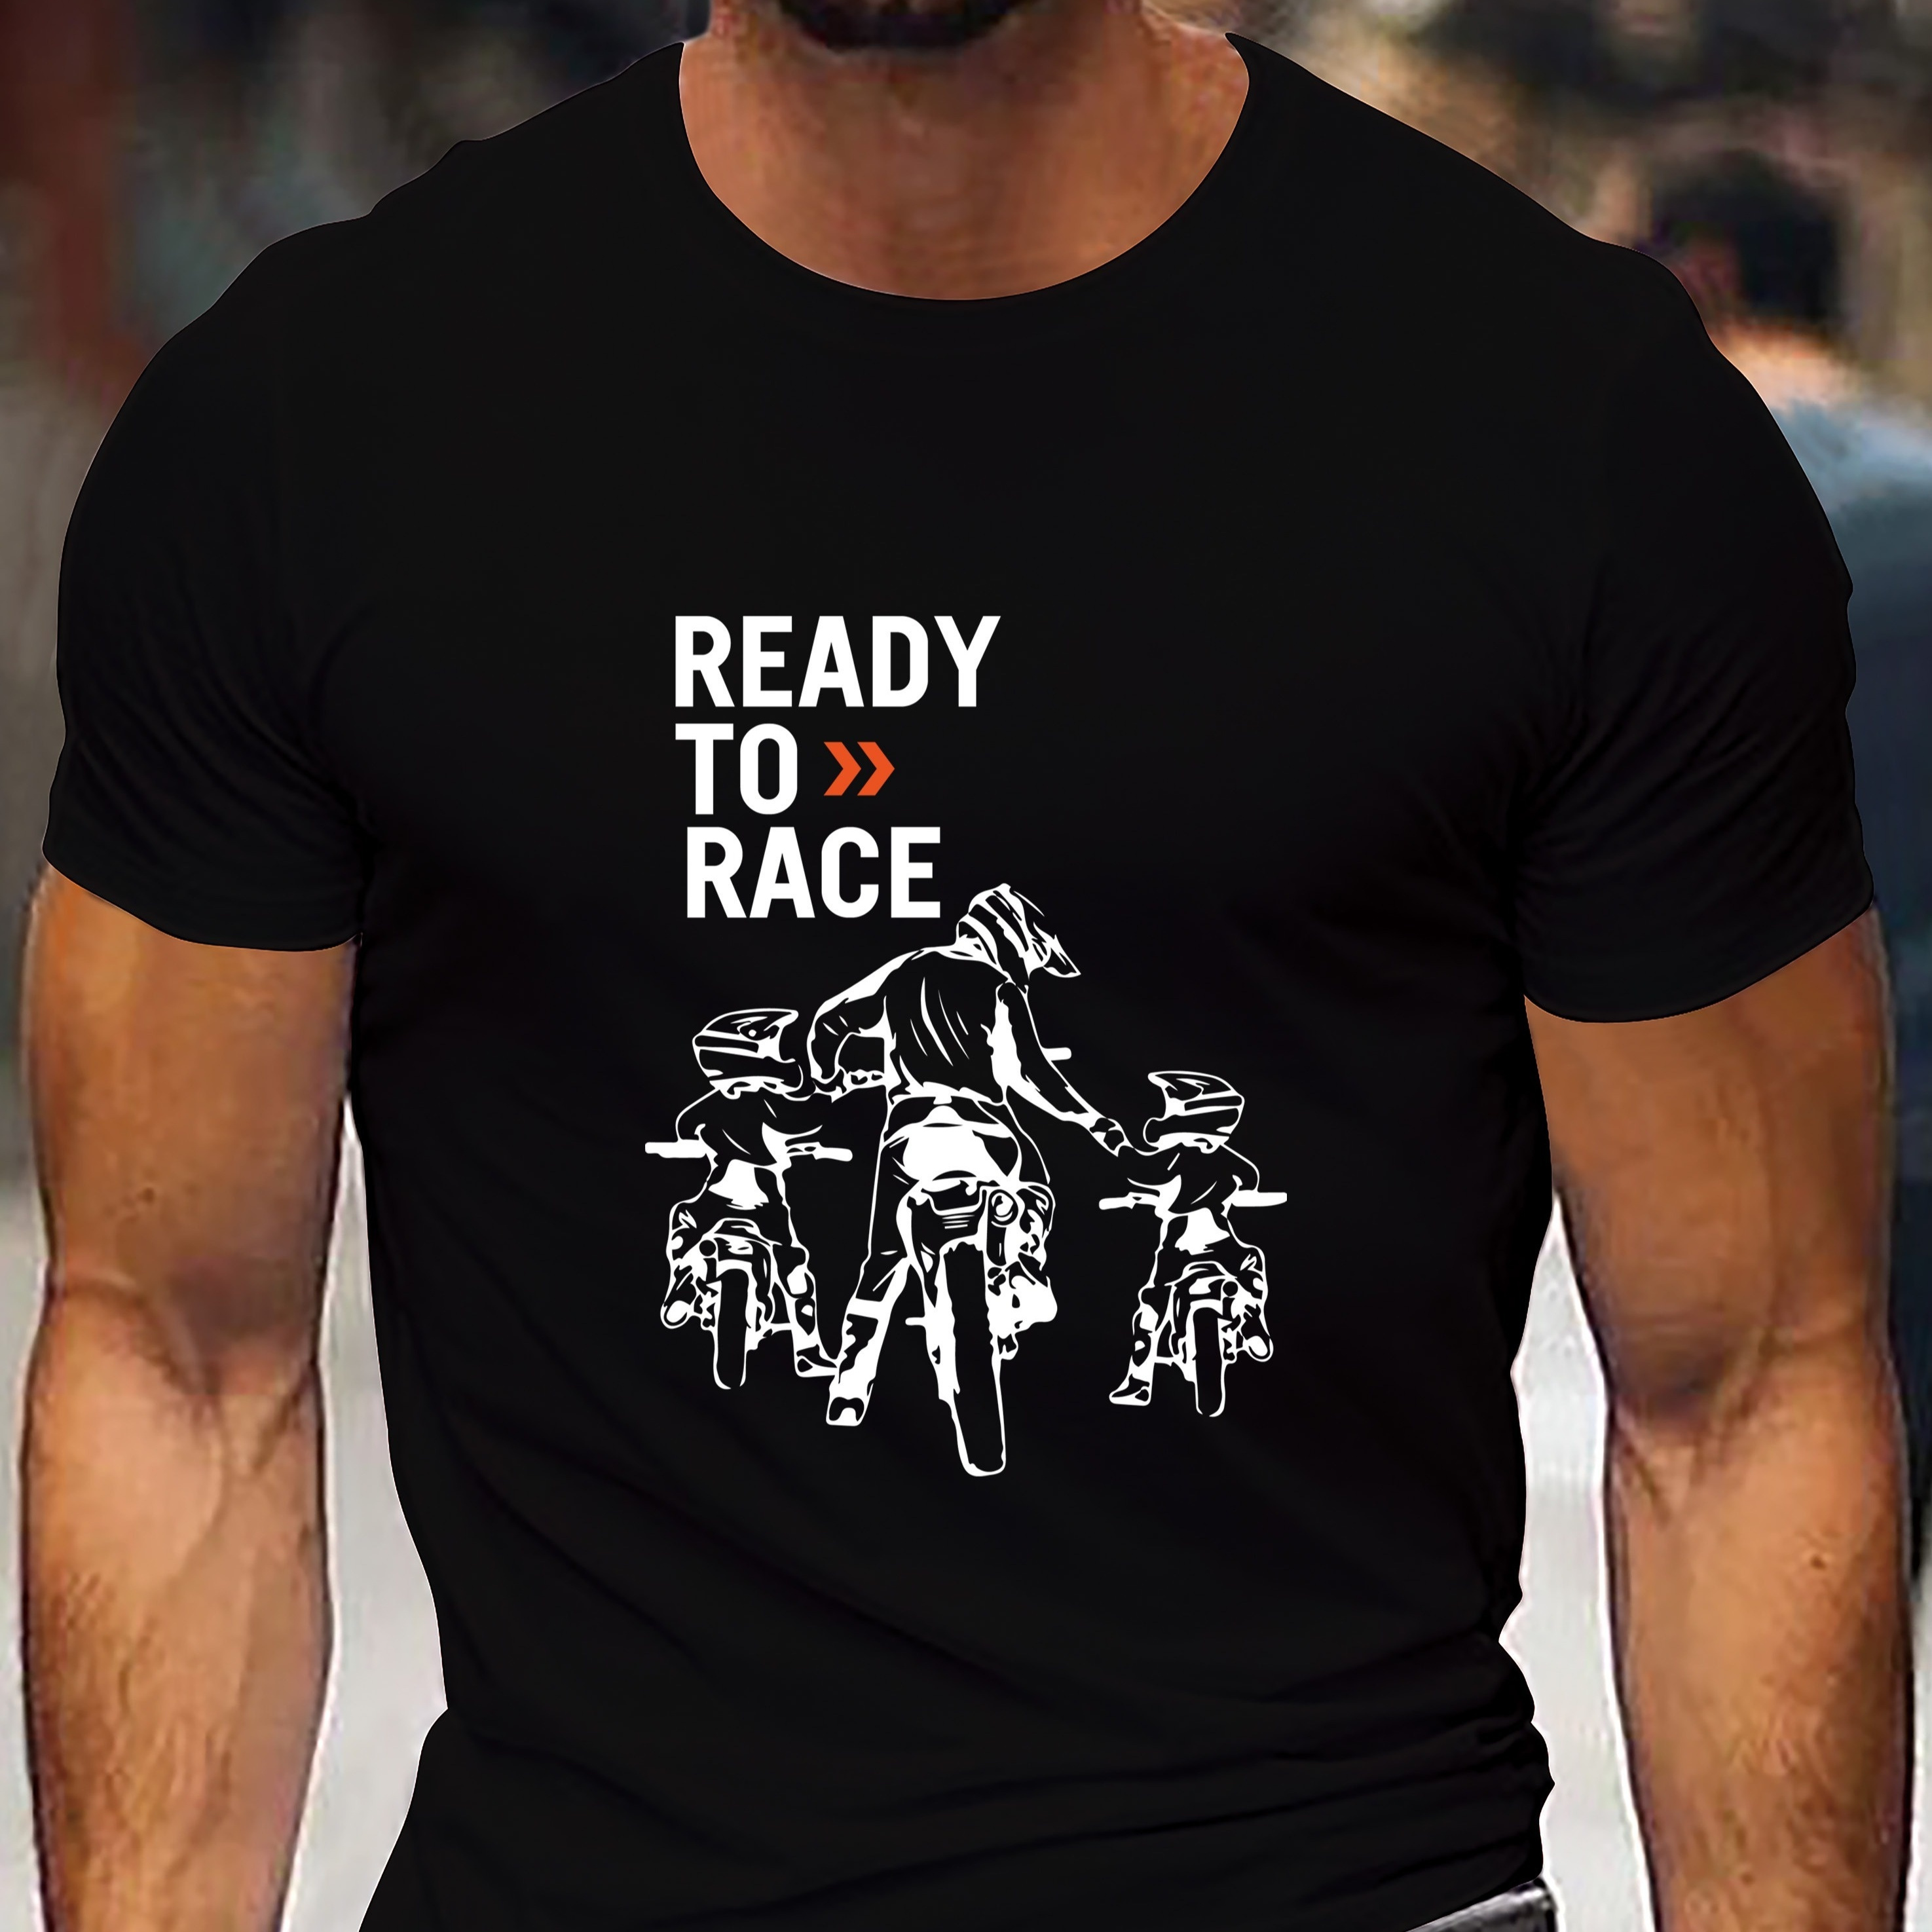 

Ready To Race Motorcycle Family Graphic Print Men's Crew Neck Short Sleeve Tees, Stylish T-shirt, Casual Comfortable Versatile Top For Summer